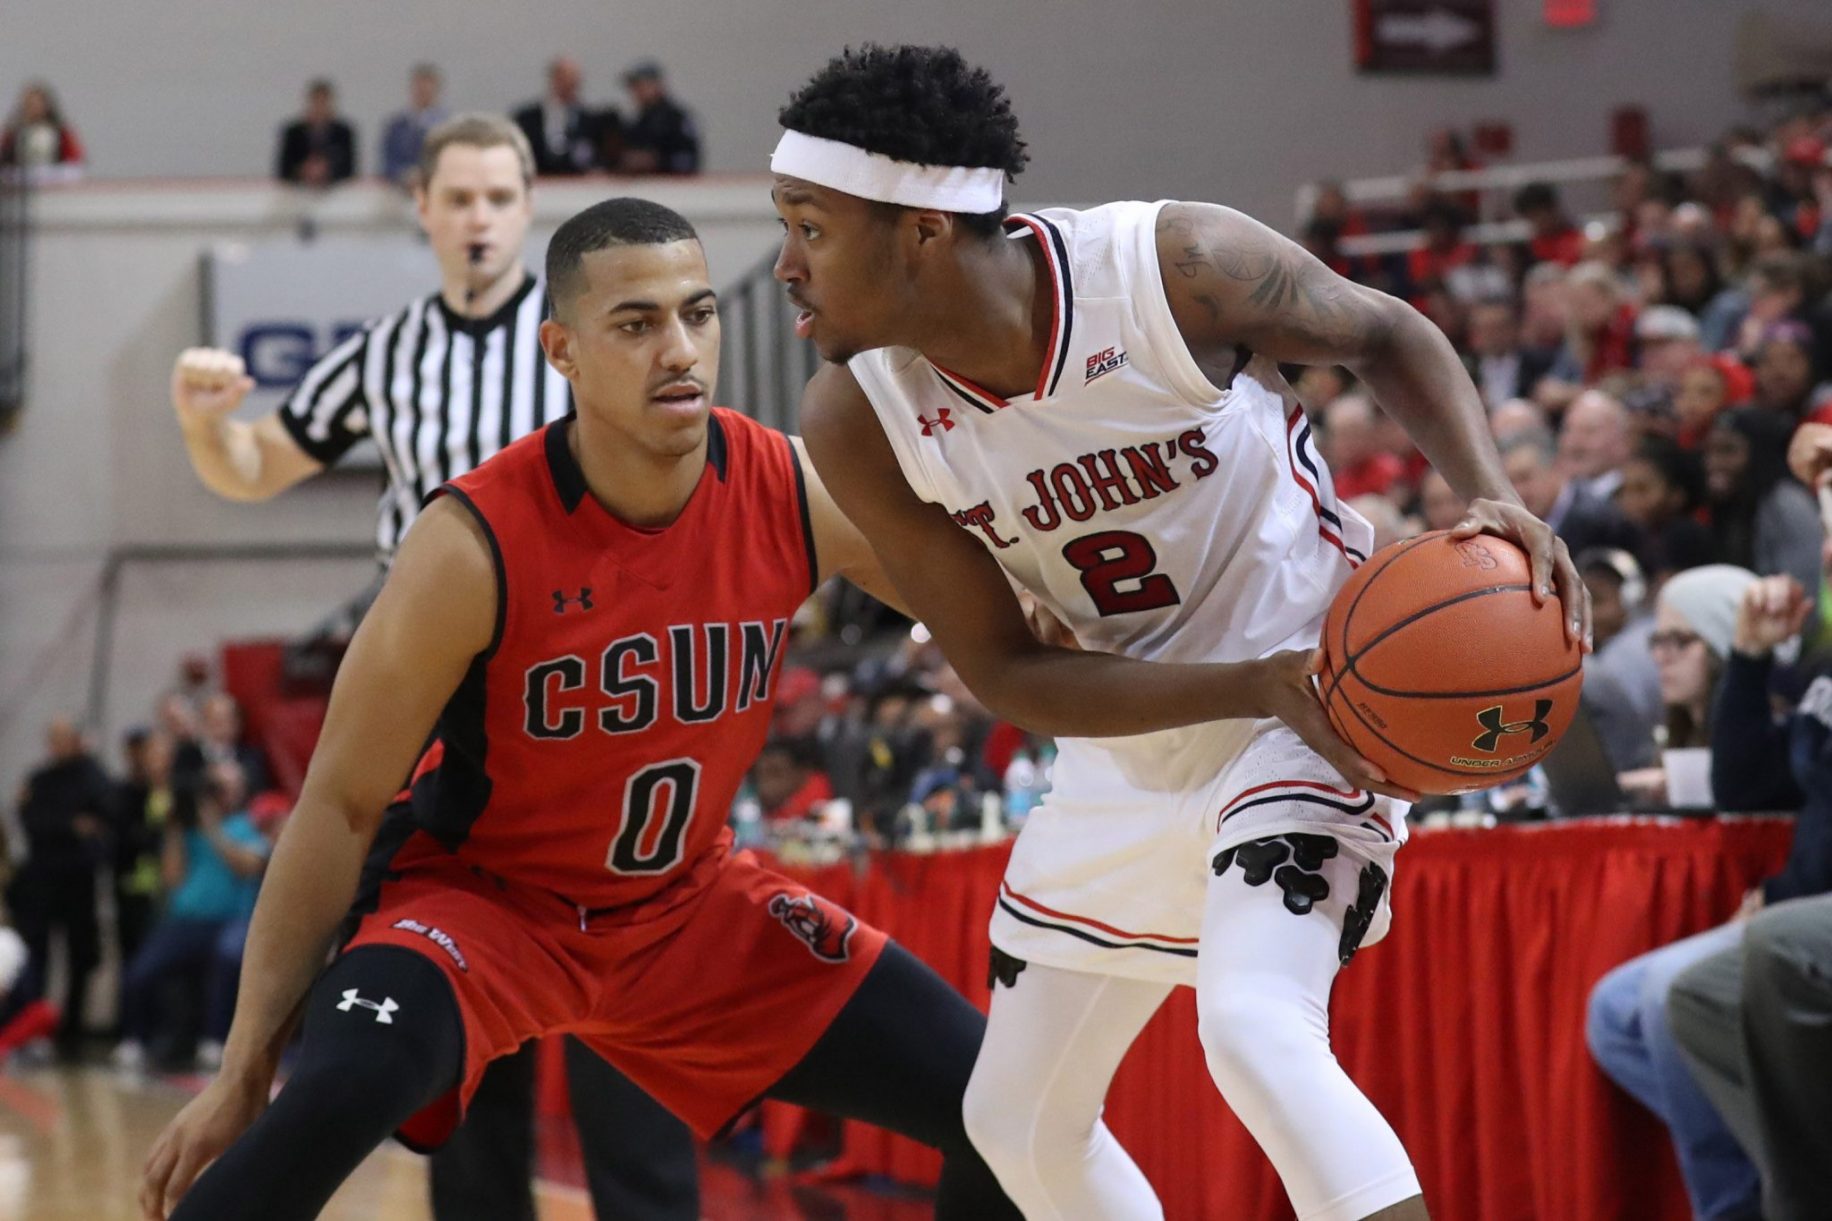 St. John's Red Storm: Shamorie Ponds continues to impress in win over Cal State 